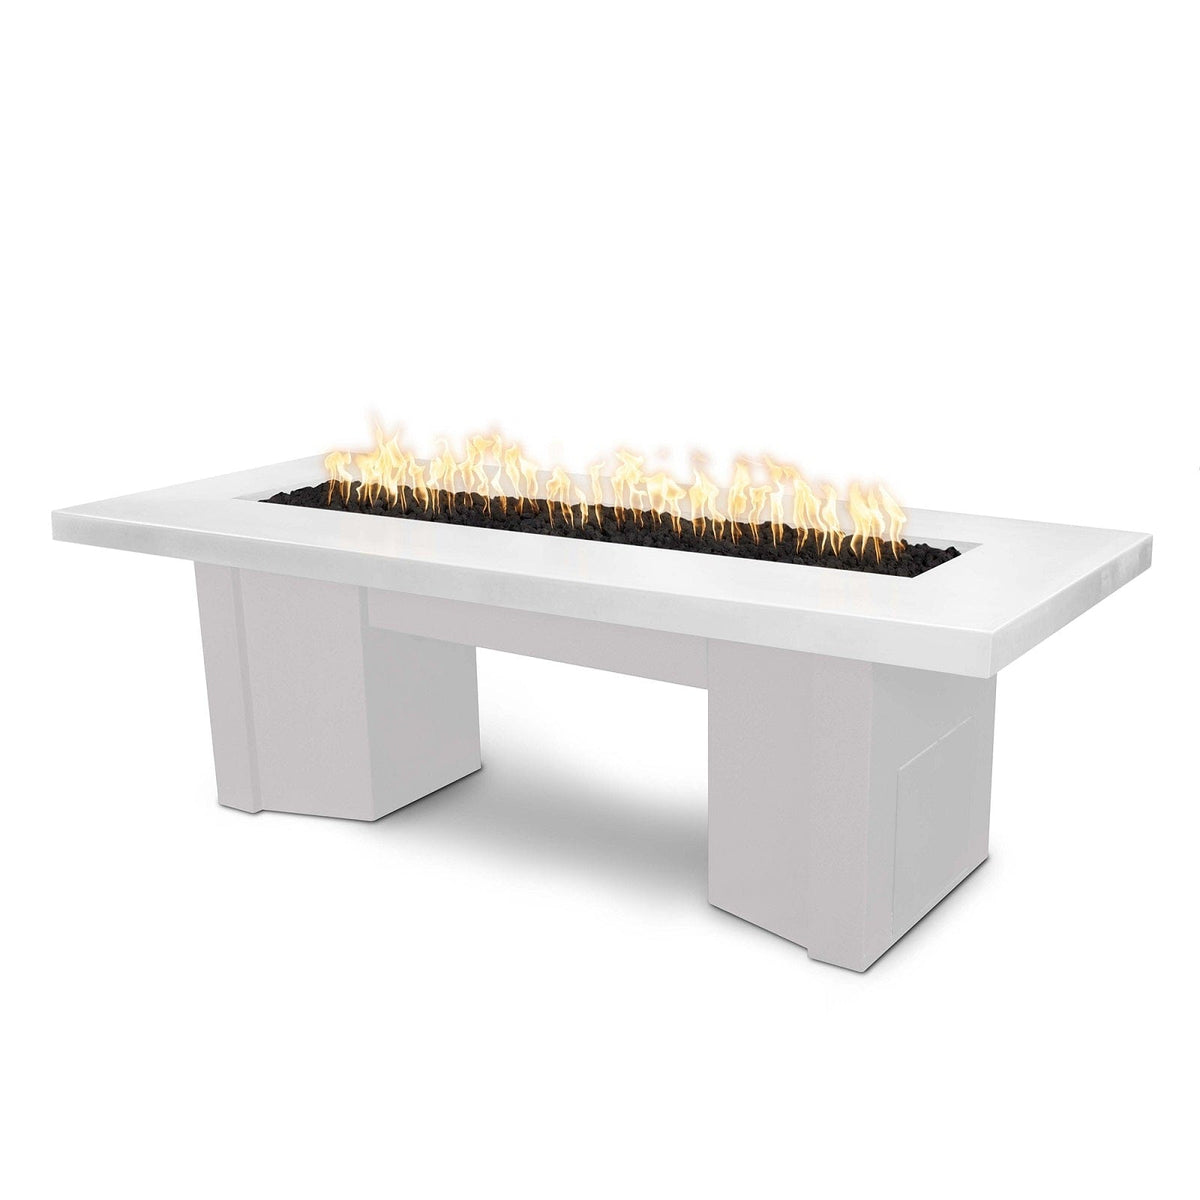 The Outdoor Plus Fire Features Limestone (-LIM) / White Powder Coated Steel (-WHT) The Outdoor Plus 60&quot; Alameda Fire Table Smooth Concrete in Liquid Propane - Flame Sense System with Push Button Spark Igniter / OPT-ALMGFRC60FSEN-LP